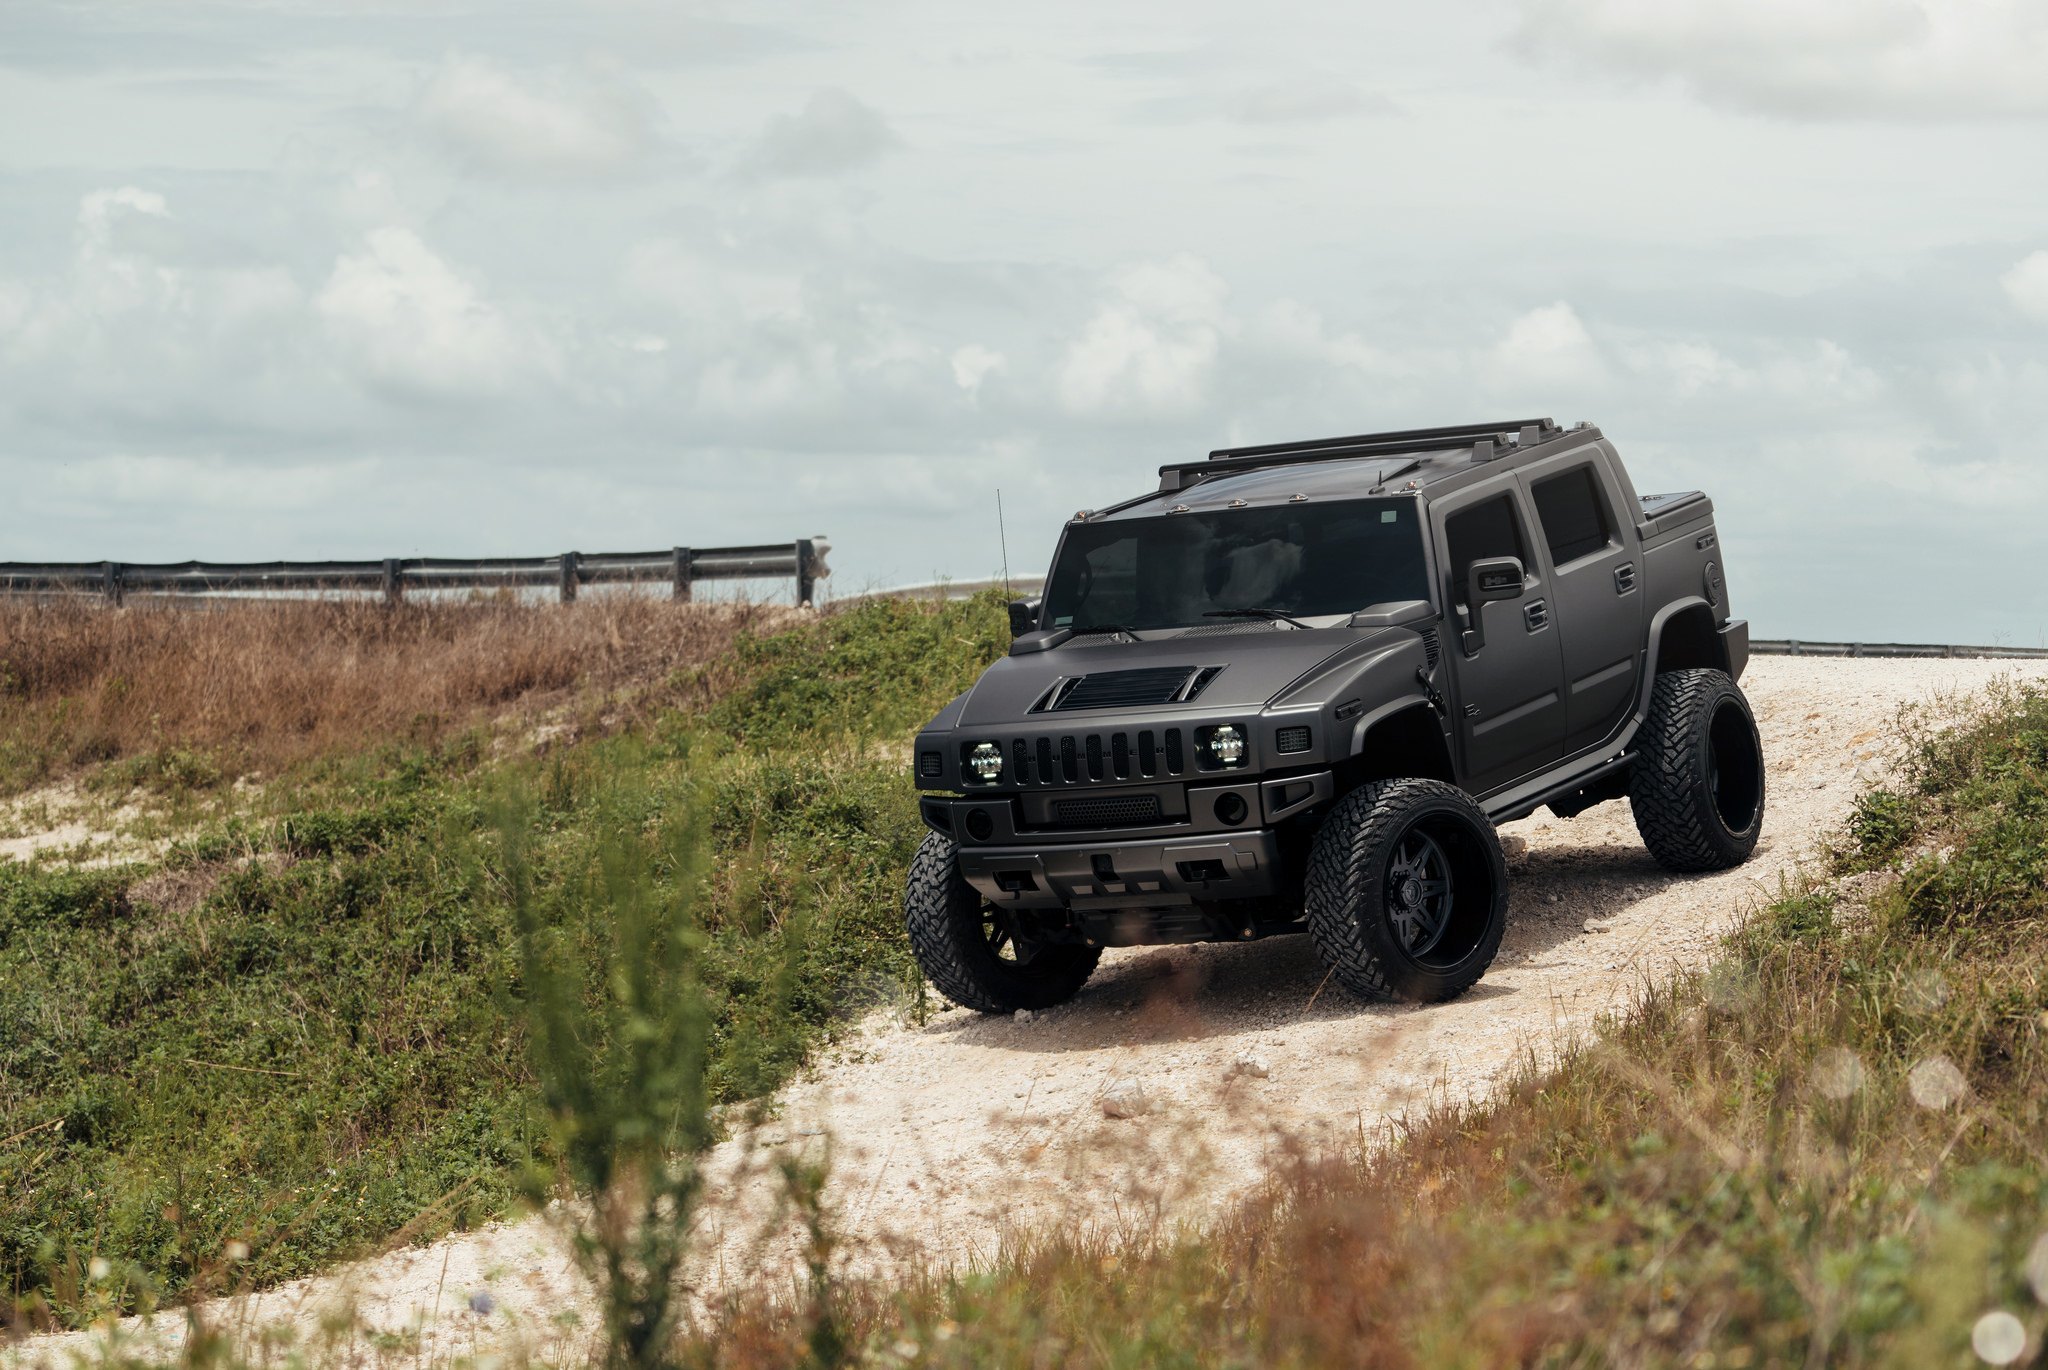 24 Inch Fuel Offroad Rims on Black Matte Hummer H2 - Photo by Fuel Offroad